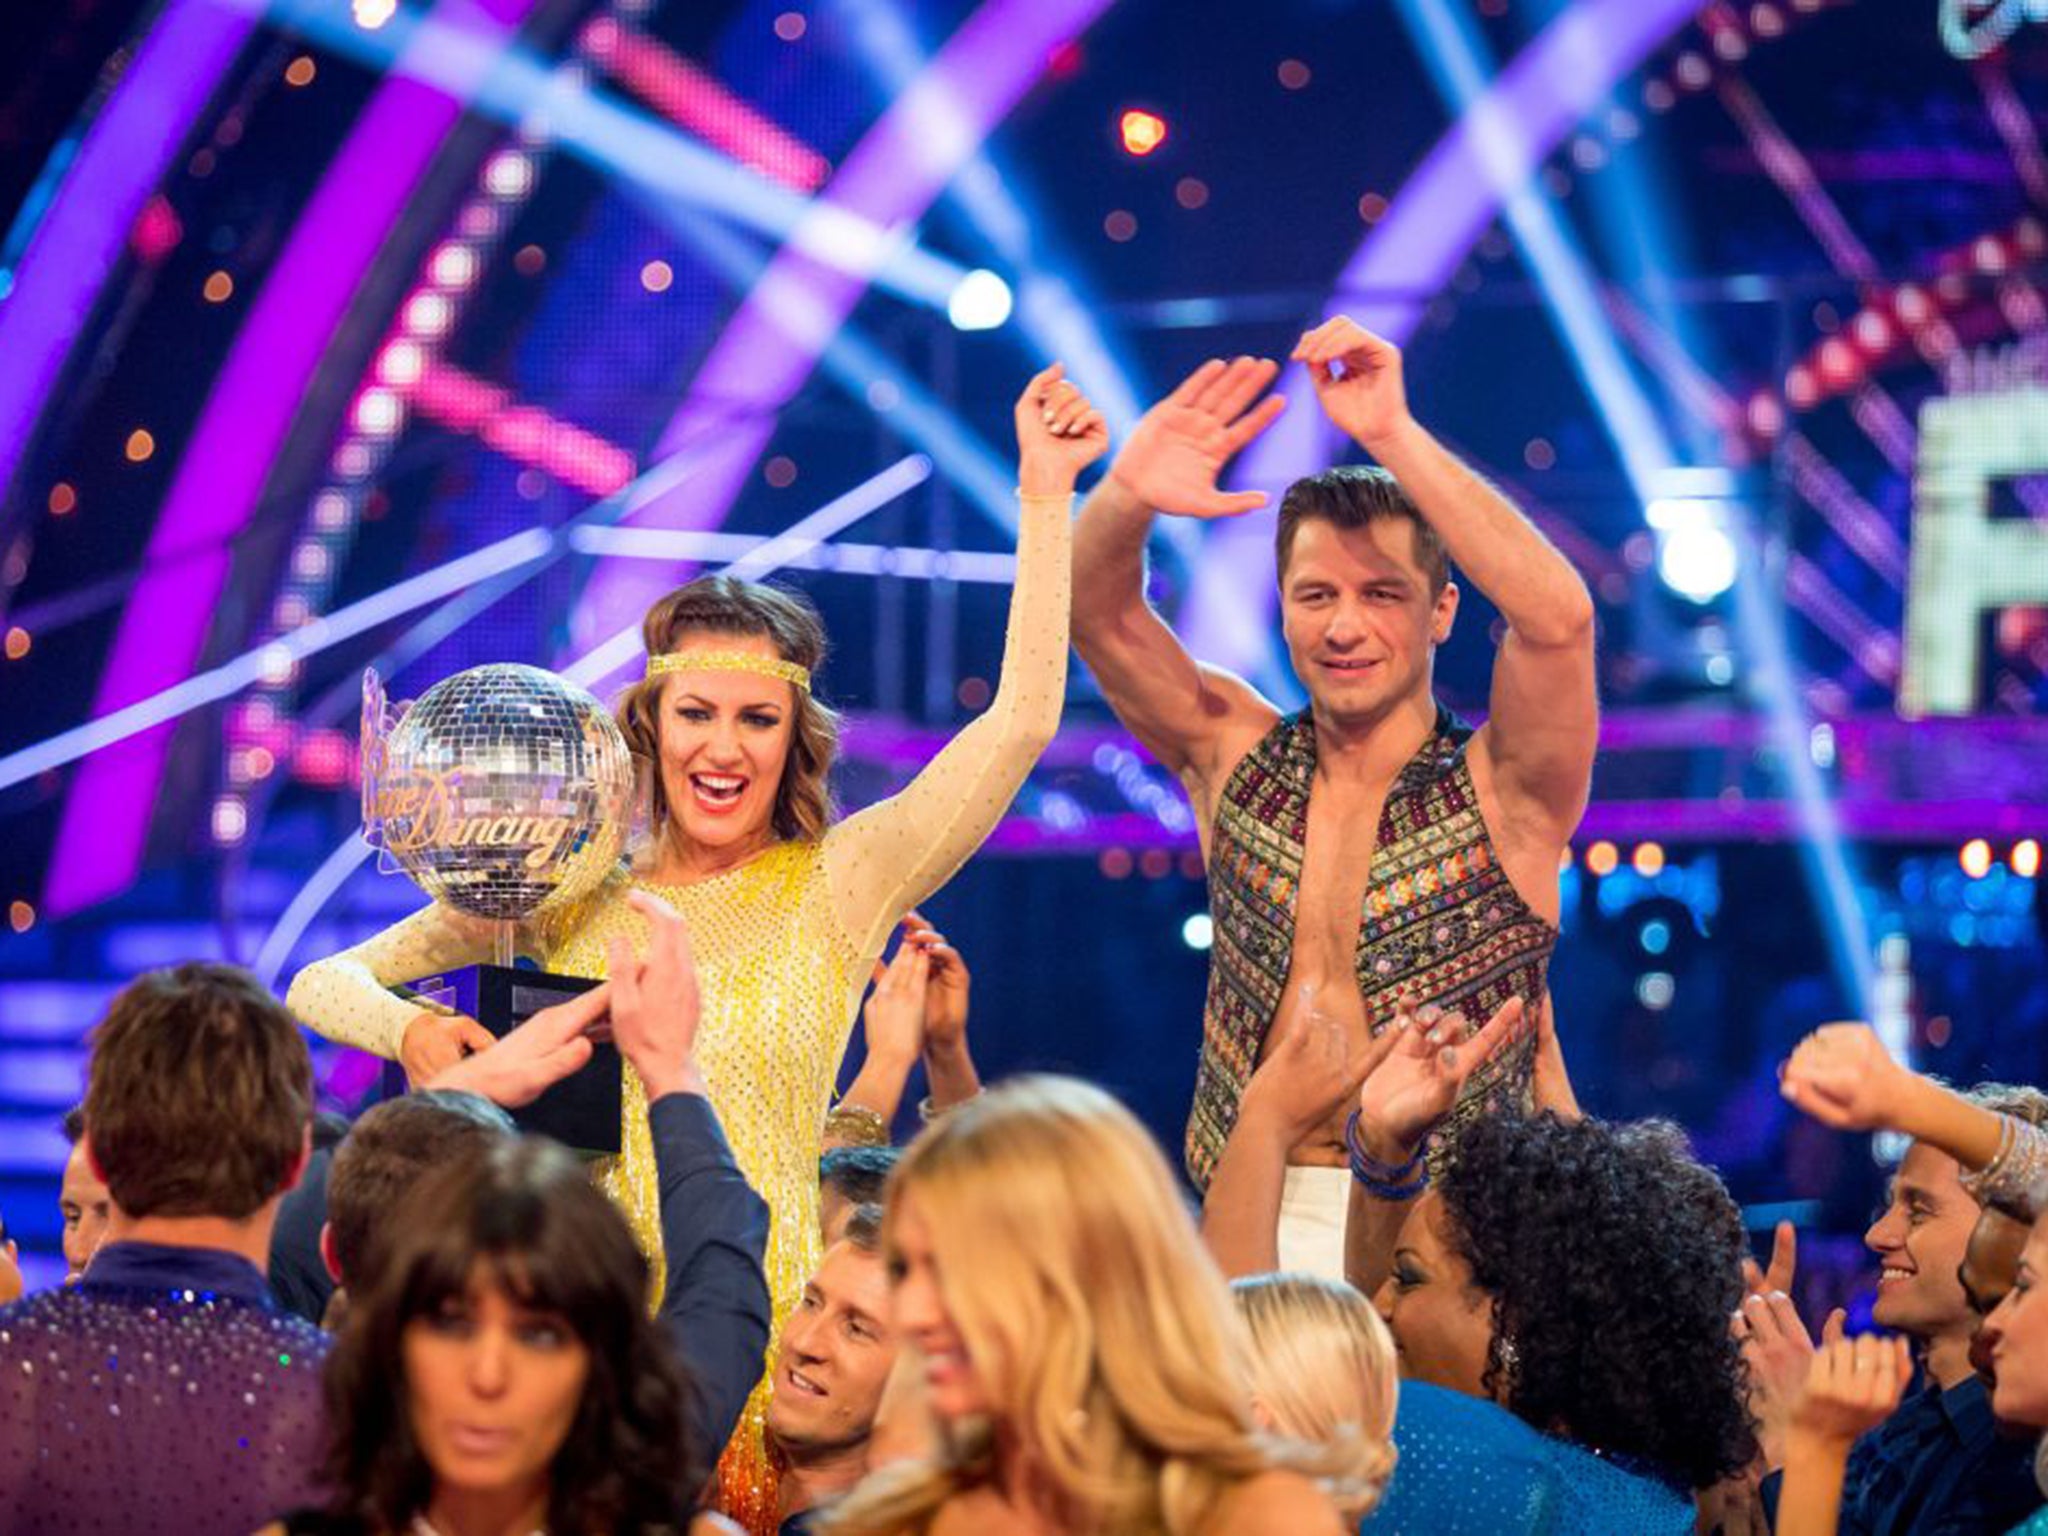 Caroline Flack became the tenth winner of Strictly Come Dancing